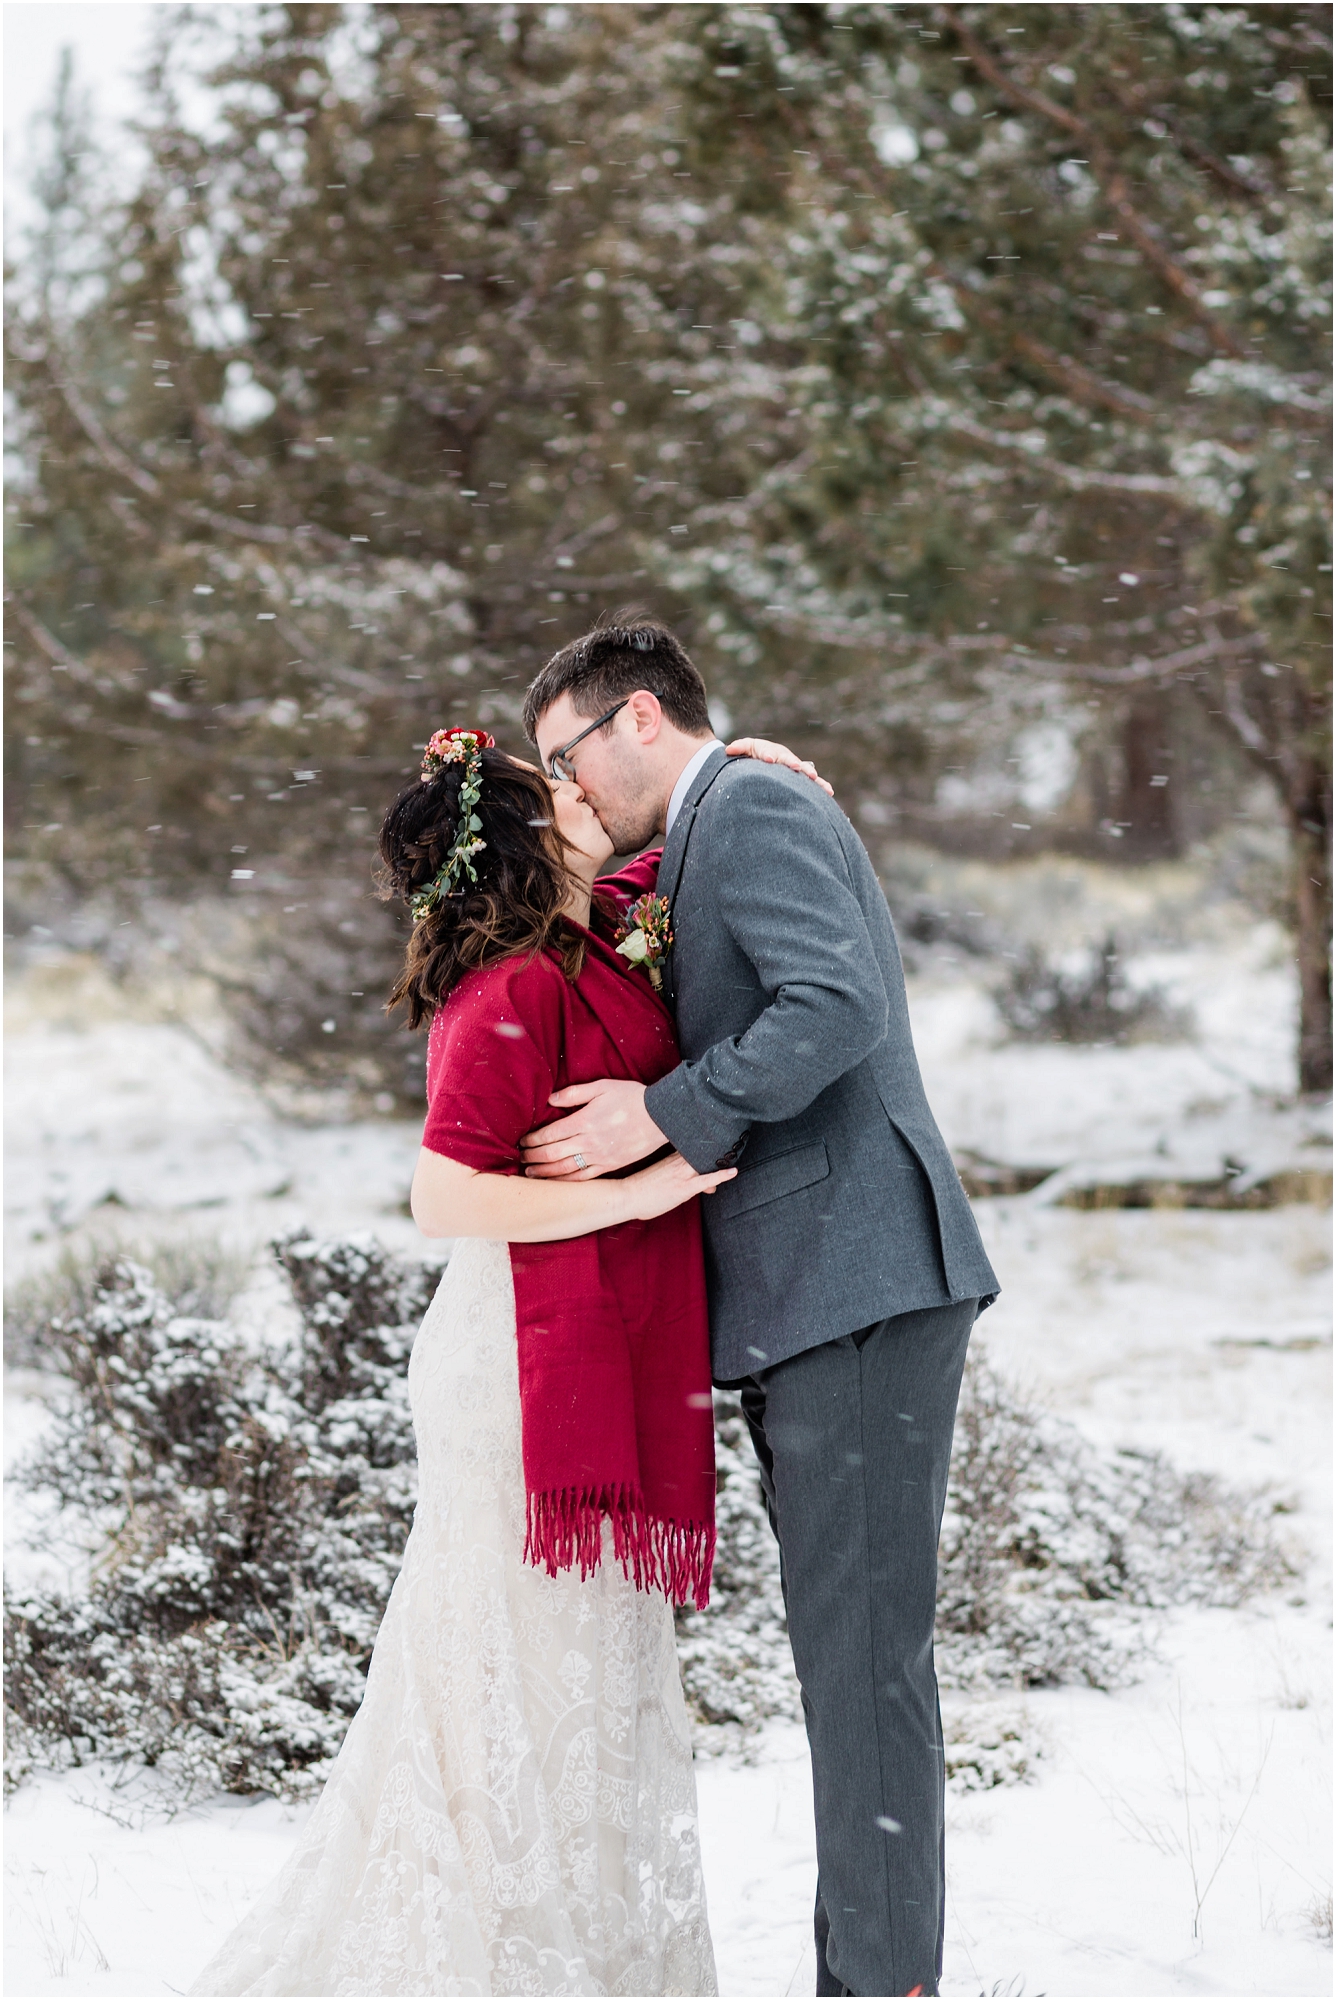 A couple's first kiss during a snowstorm at their intimate Central Oregon winter elopement near Five Pine Lodge in Sisters, Oregon. | Erica Swantek Photography